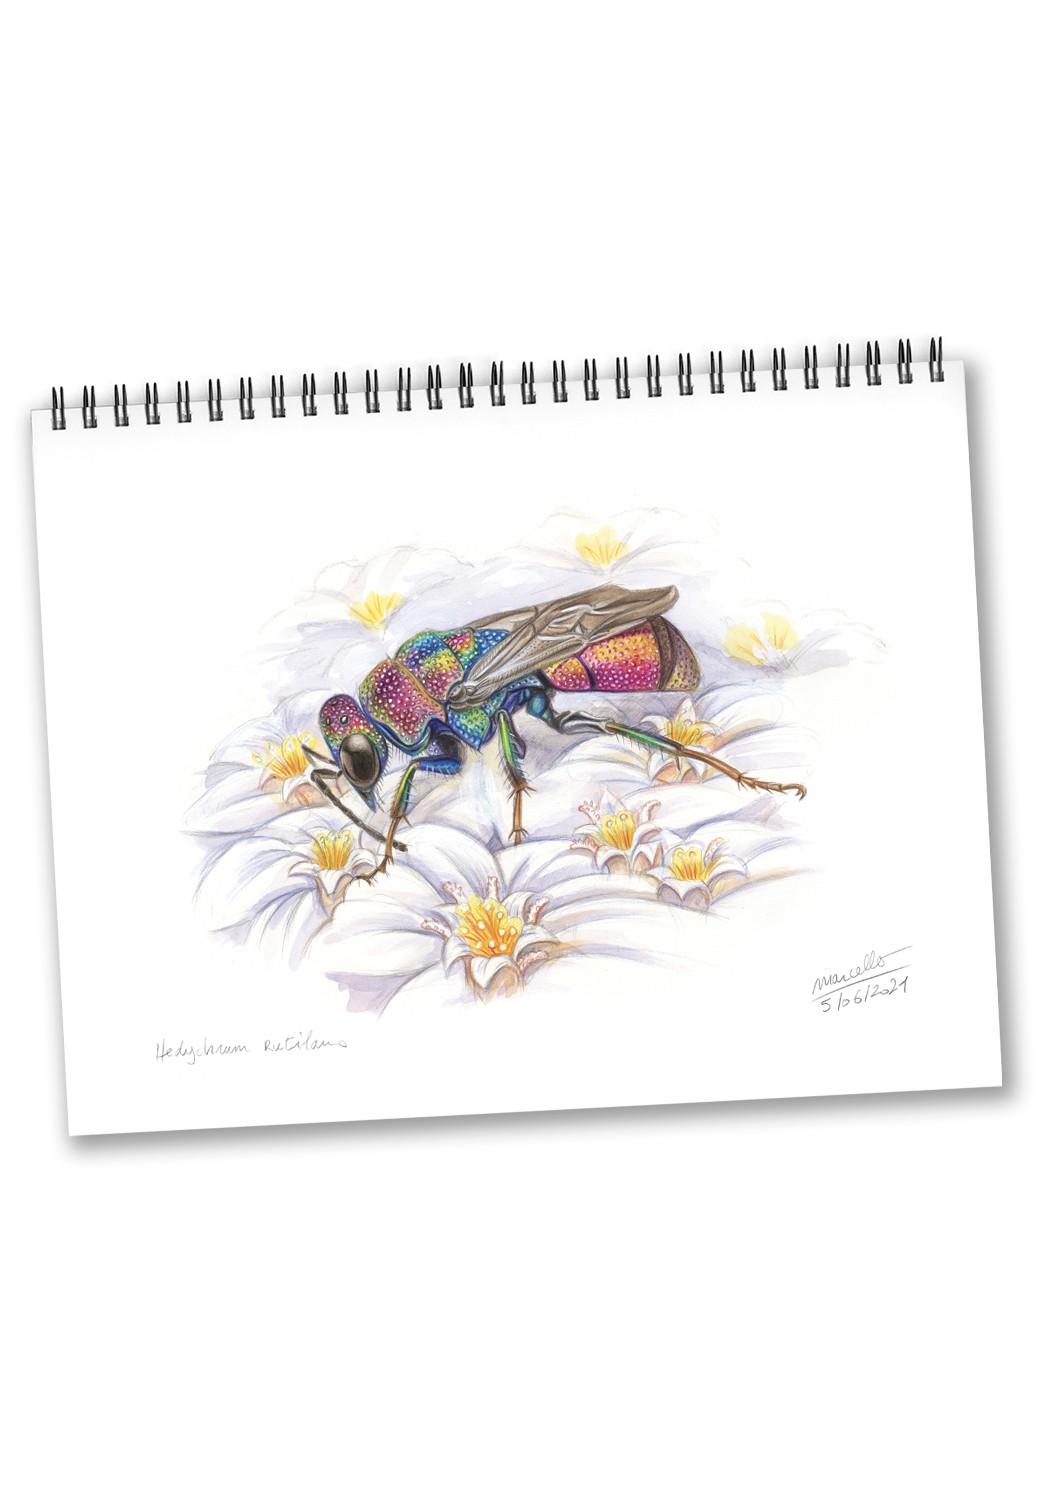 Marcello-art : Éditions Calendrier 2023 Insectes